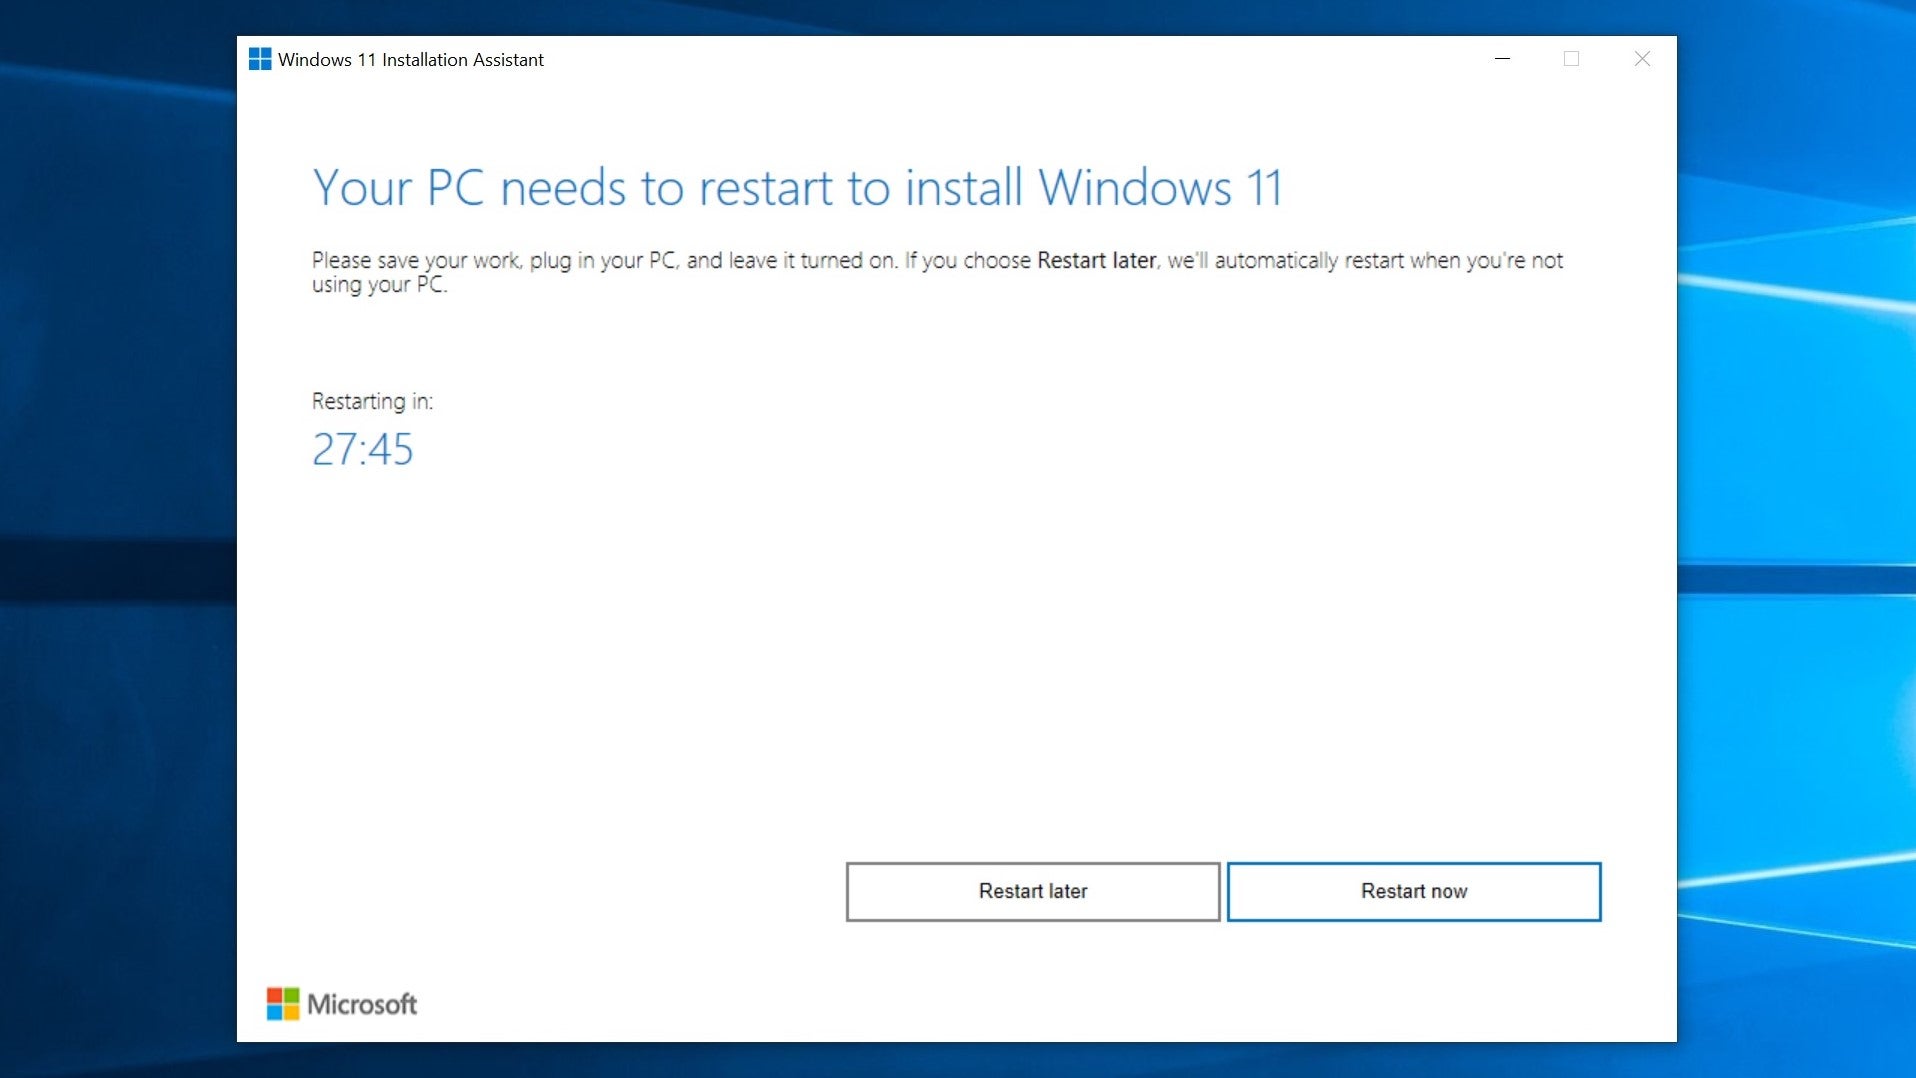 The Windows 11 Installation Assistant, counting down to an automatic restart.